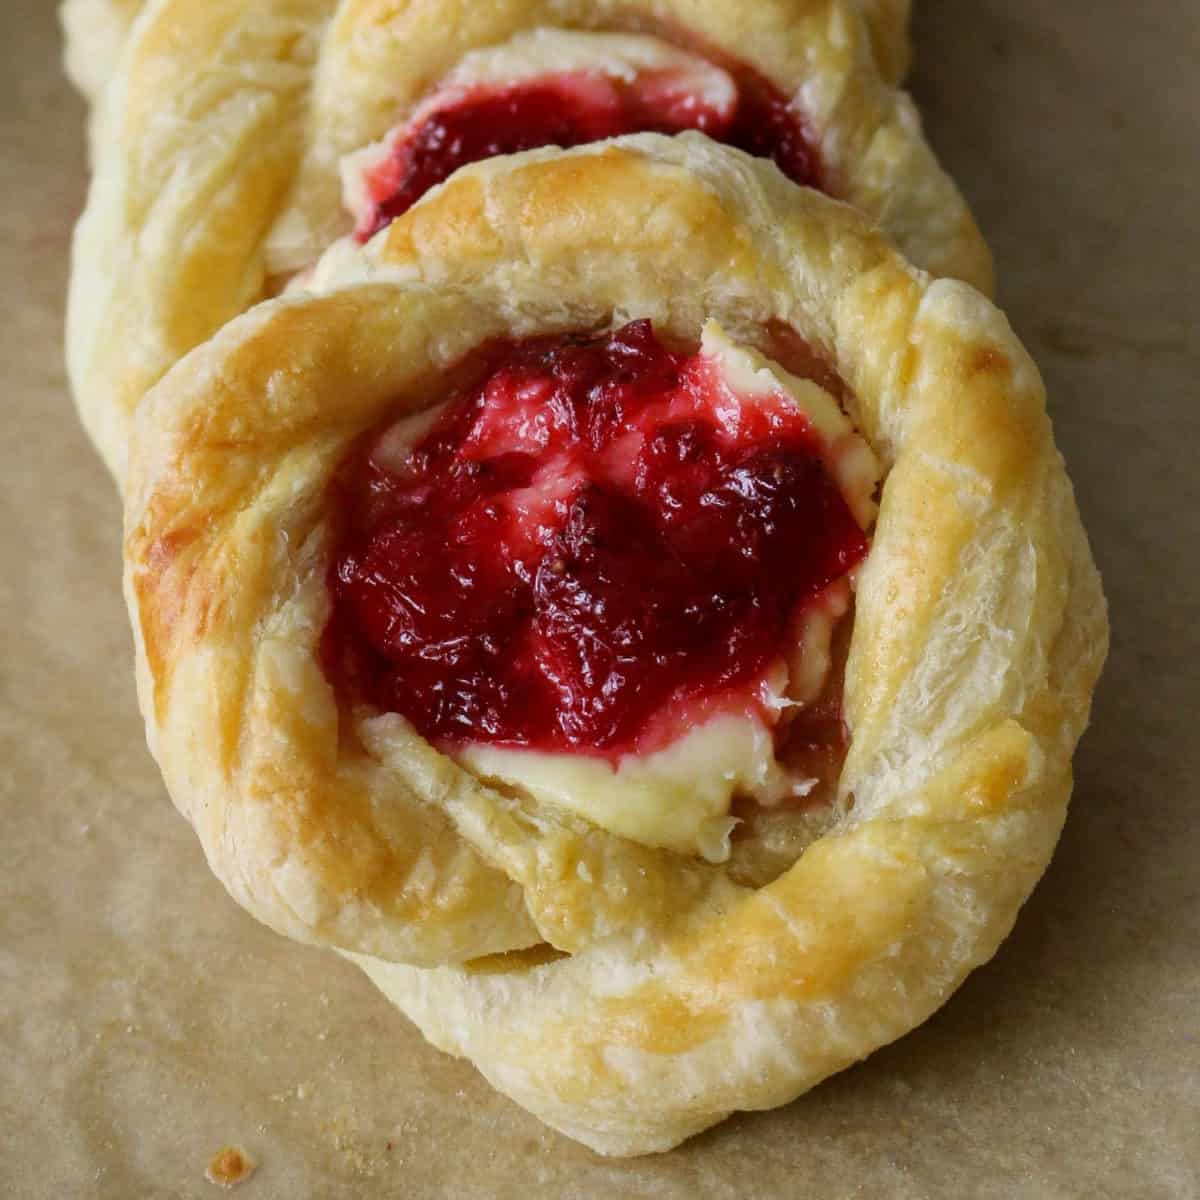 Strawberry pastry close up.